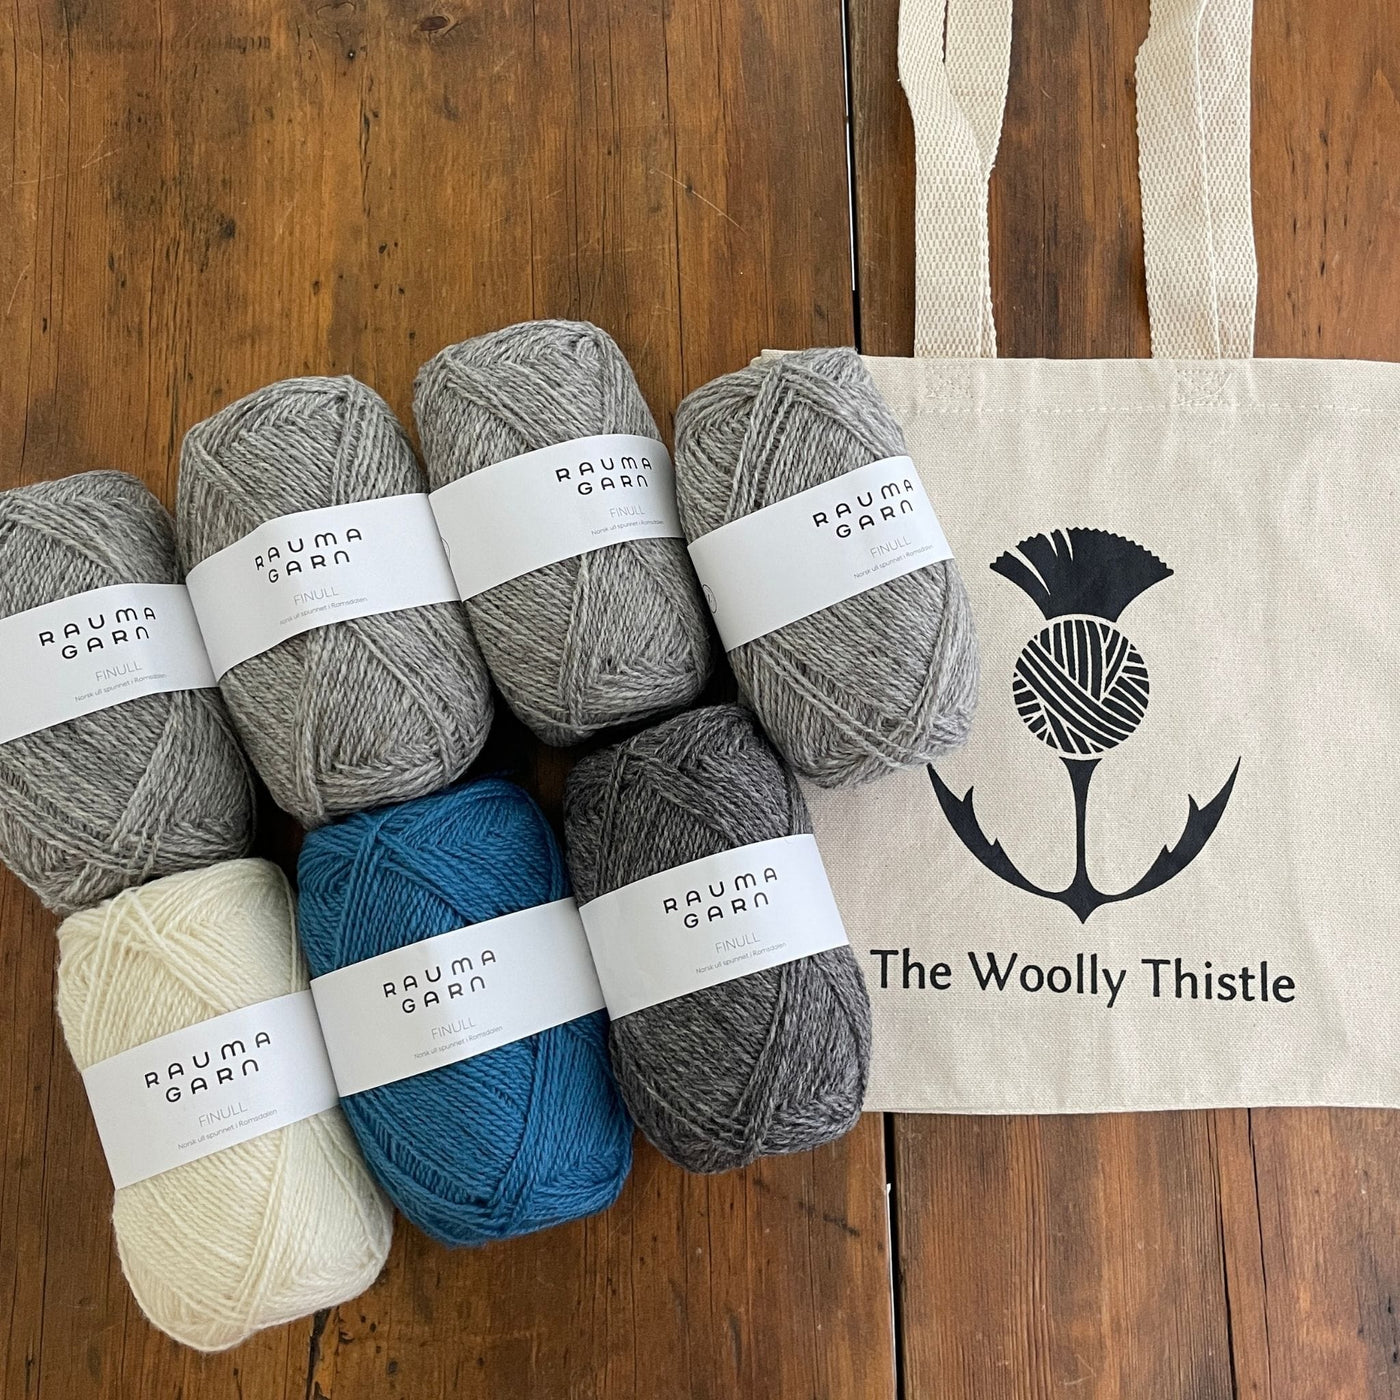 Components of the Varde Skirt Kit including TWT Tote, and Rauma Finullgarn yarn in greys and blue.